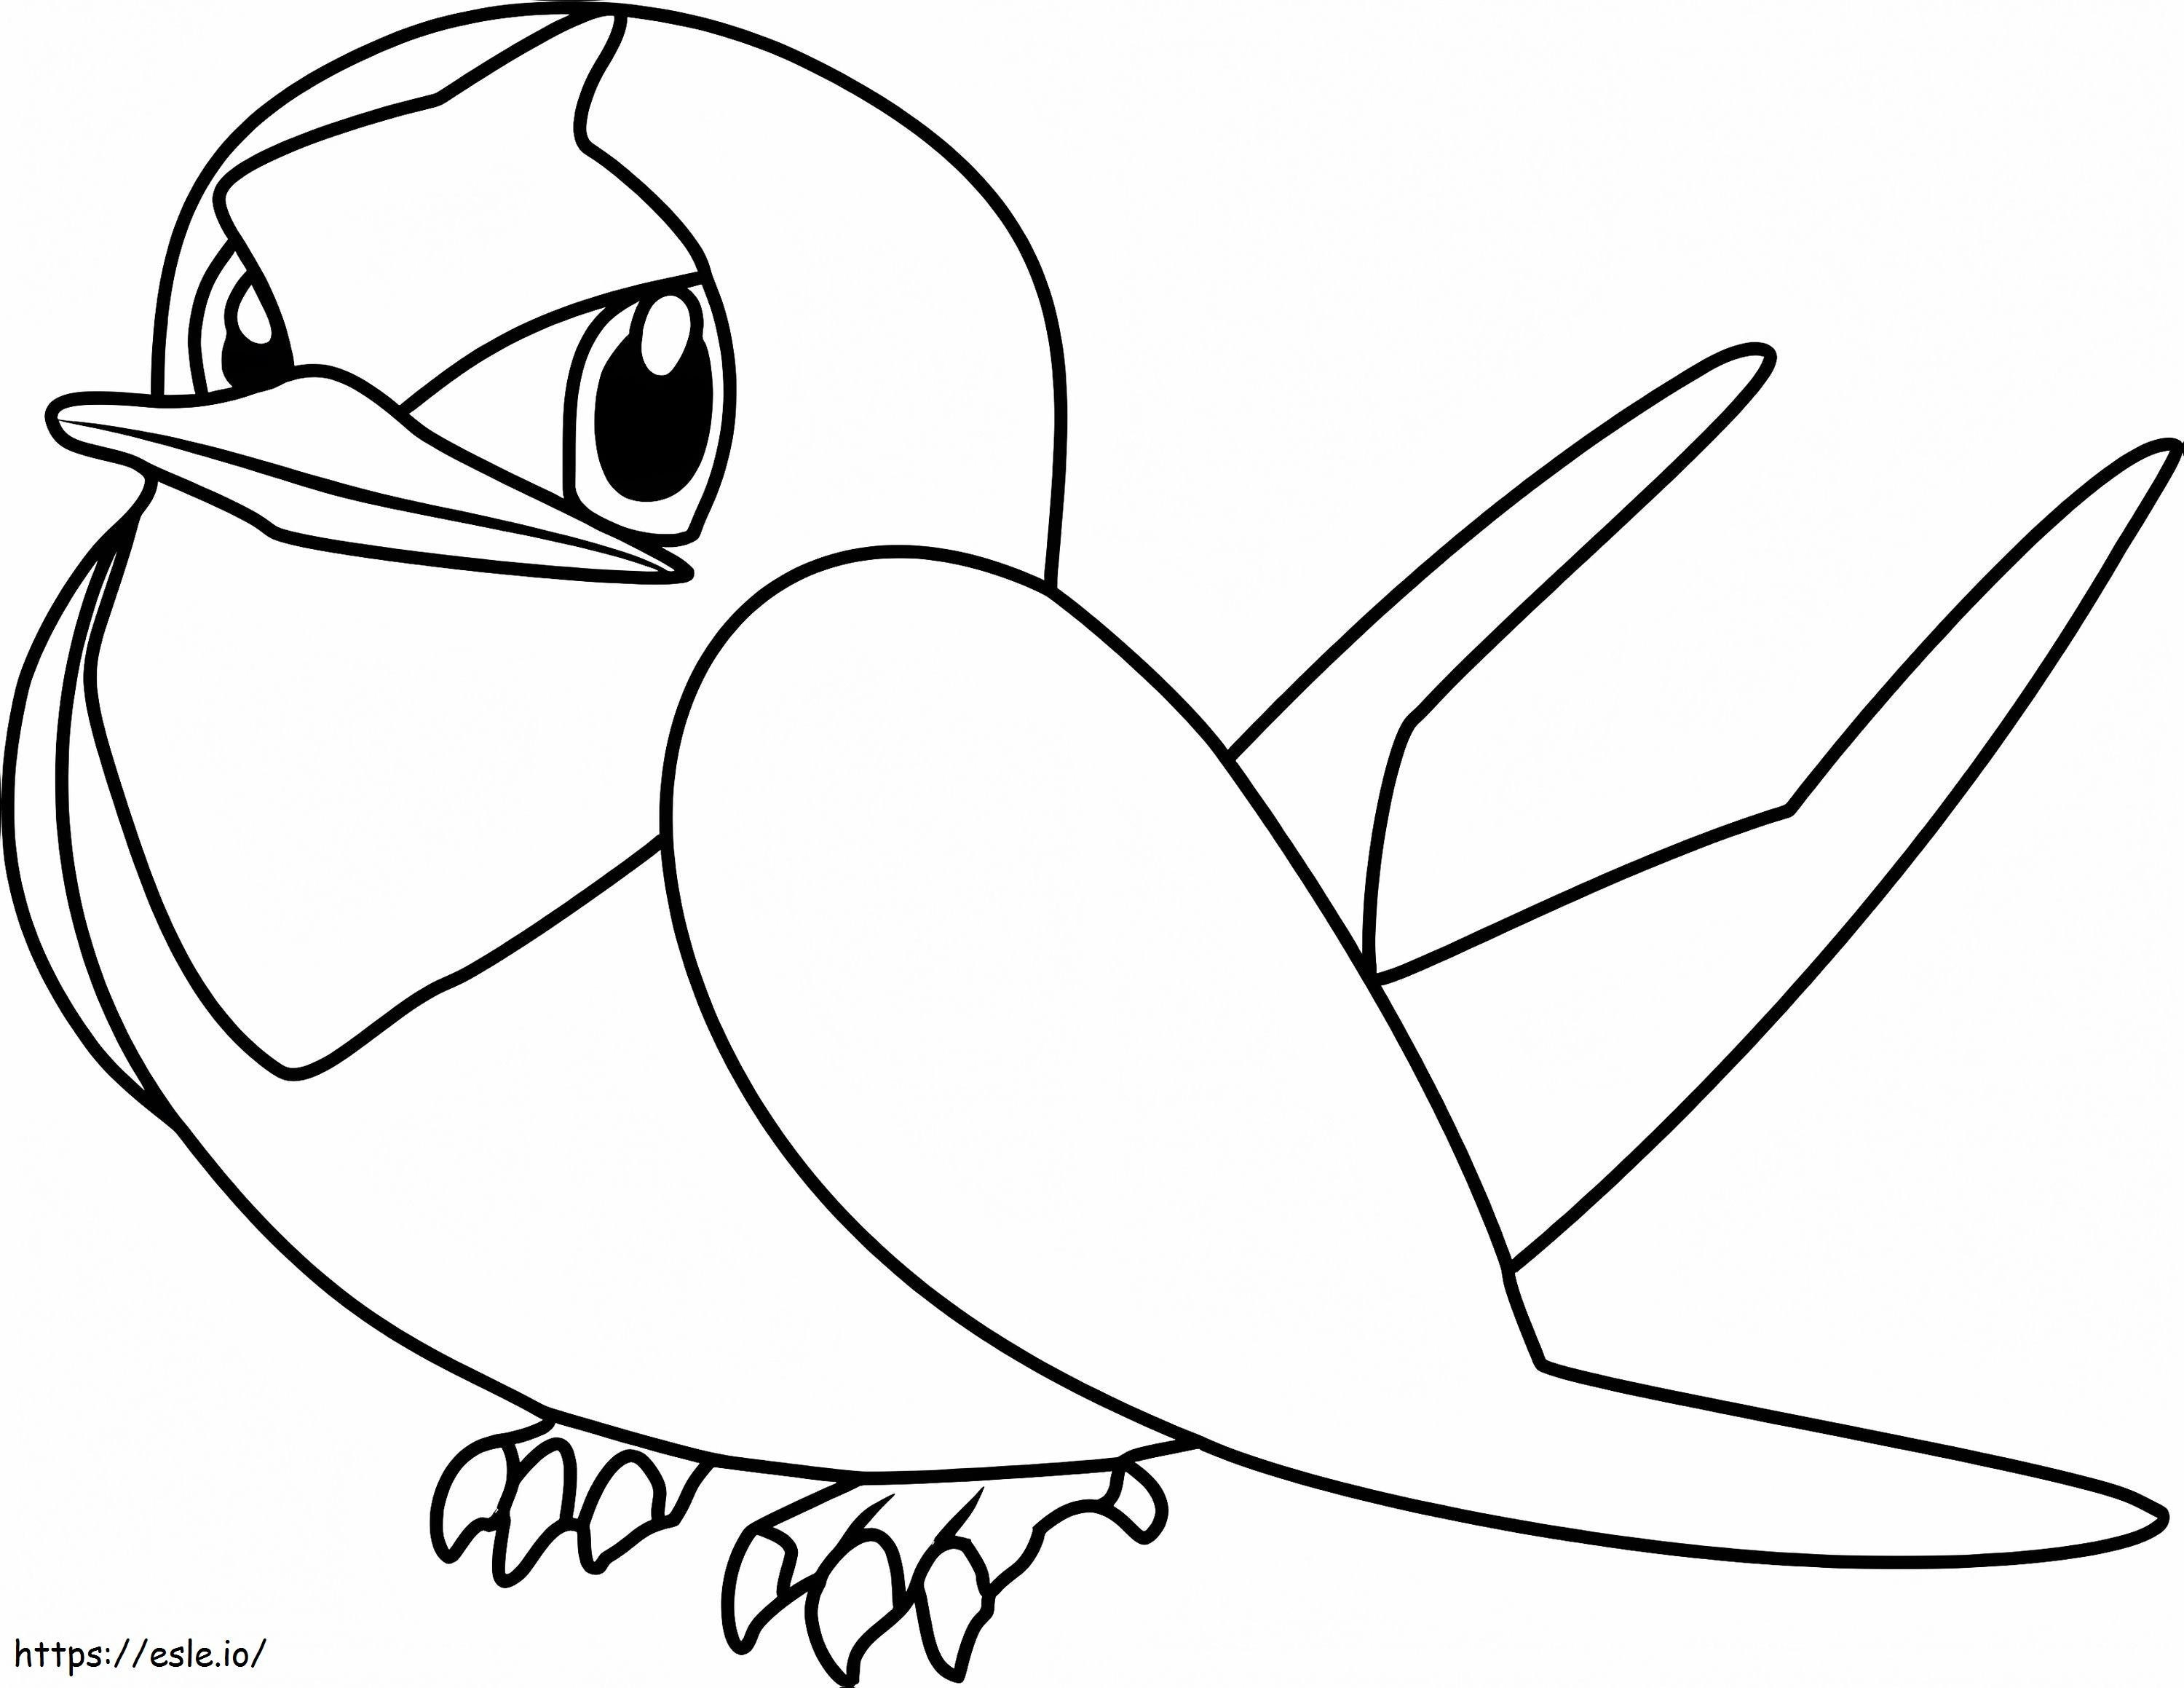 Taillow Gen 3 Pokemon coloring page